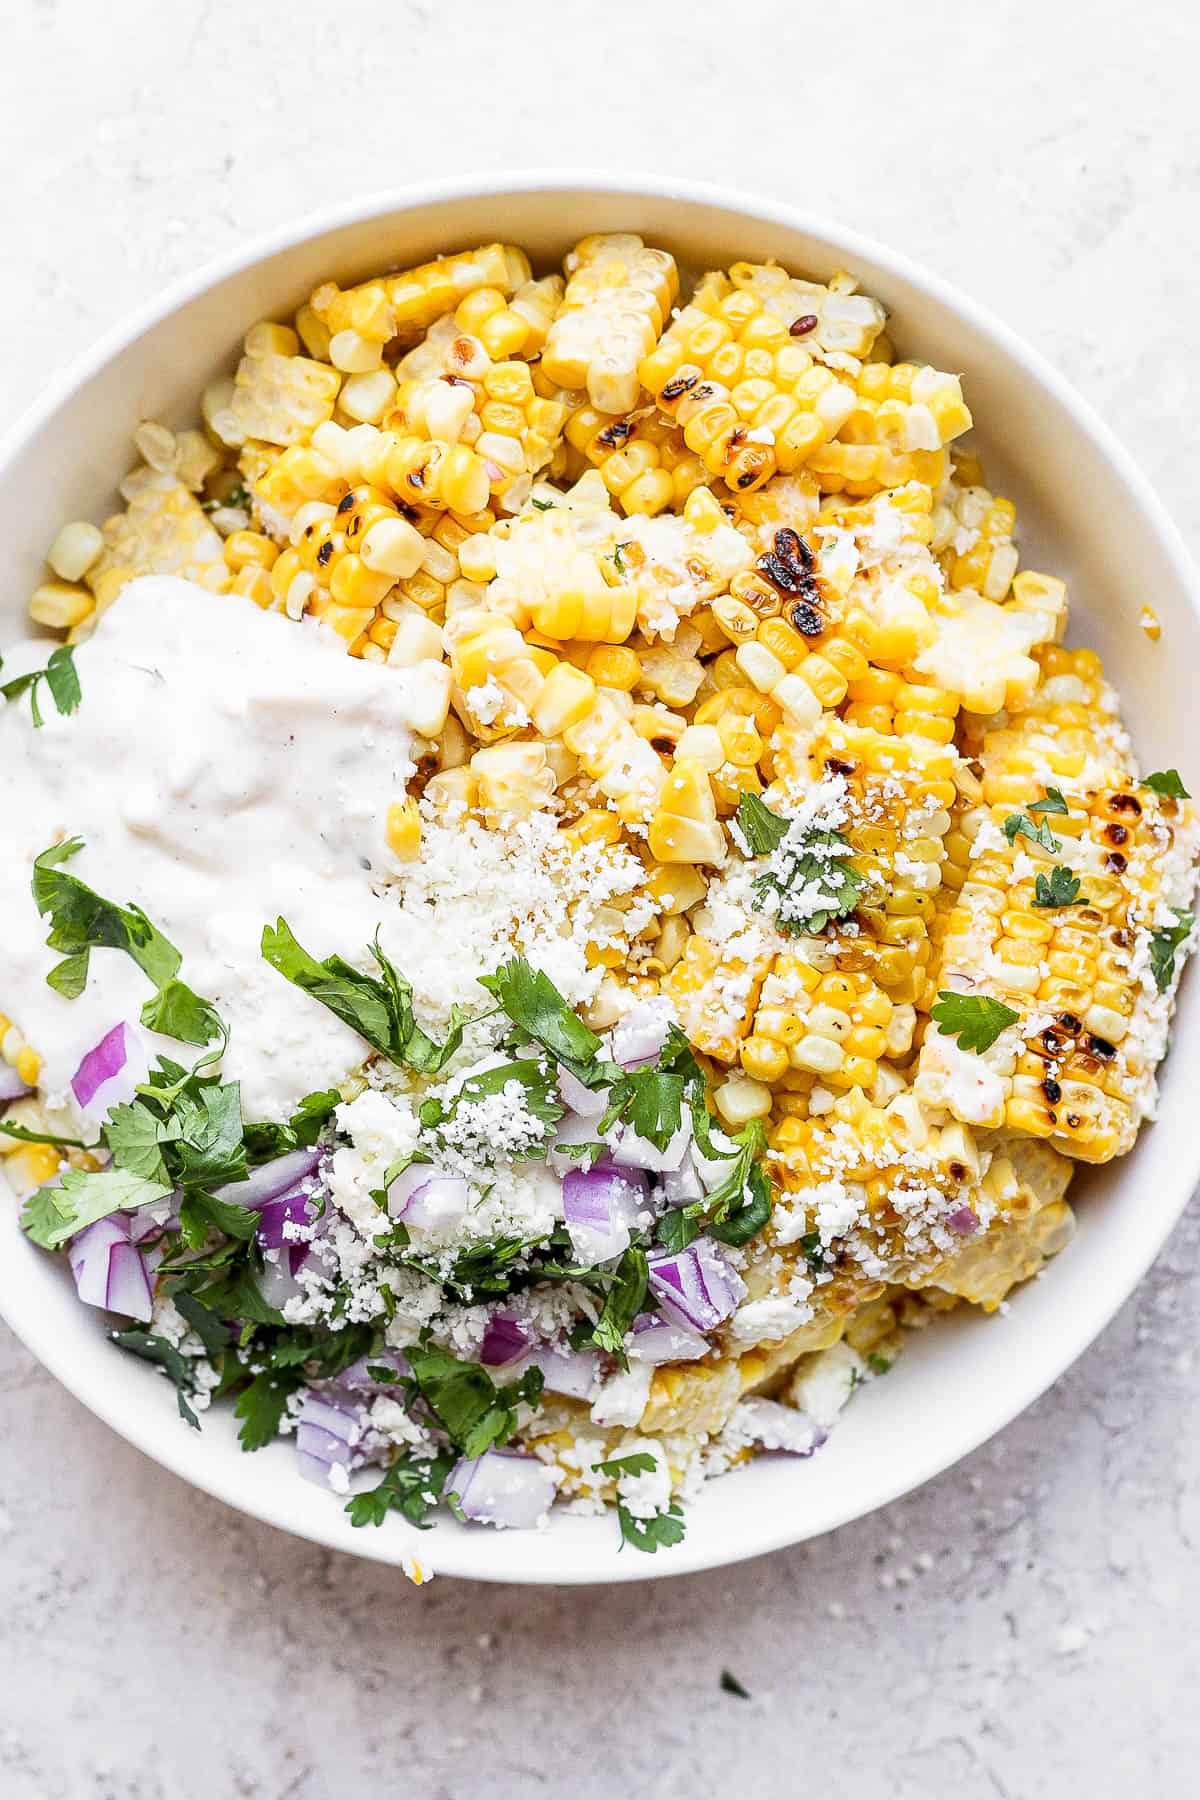 All of the ingredients for mexican street corn salad in a white bowl.